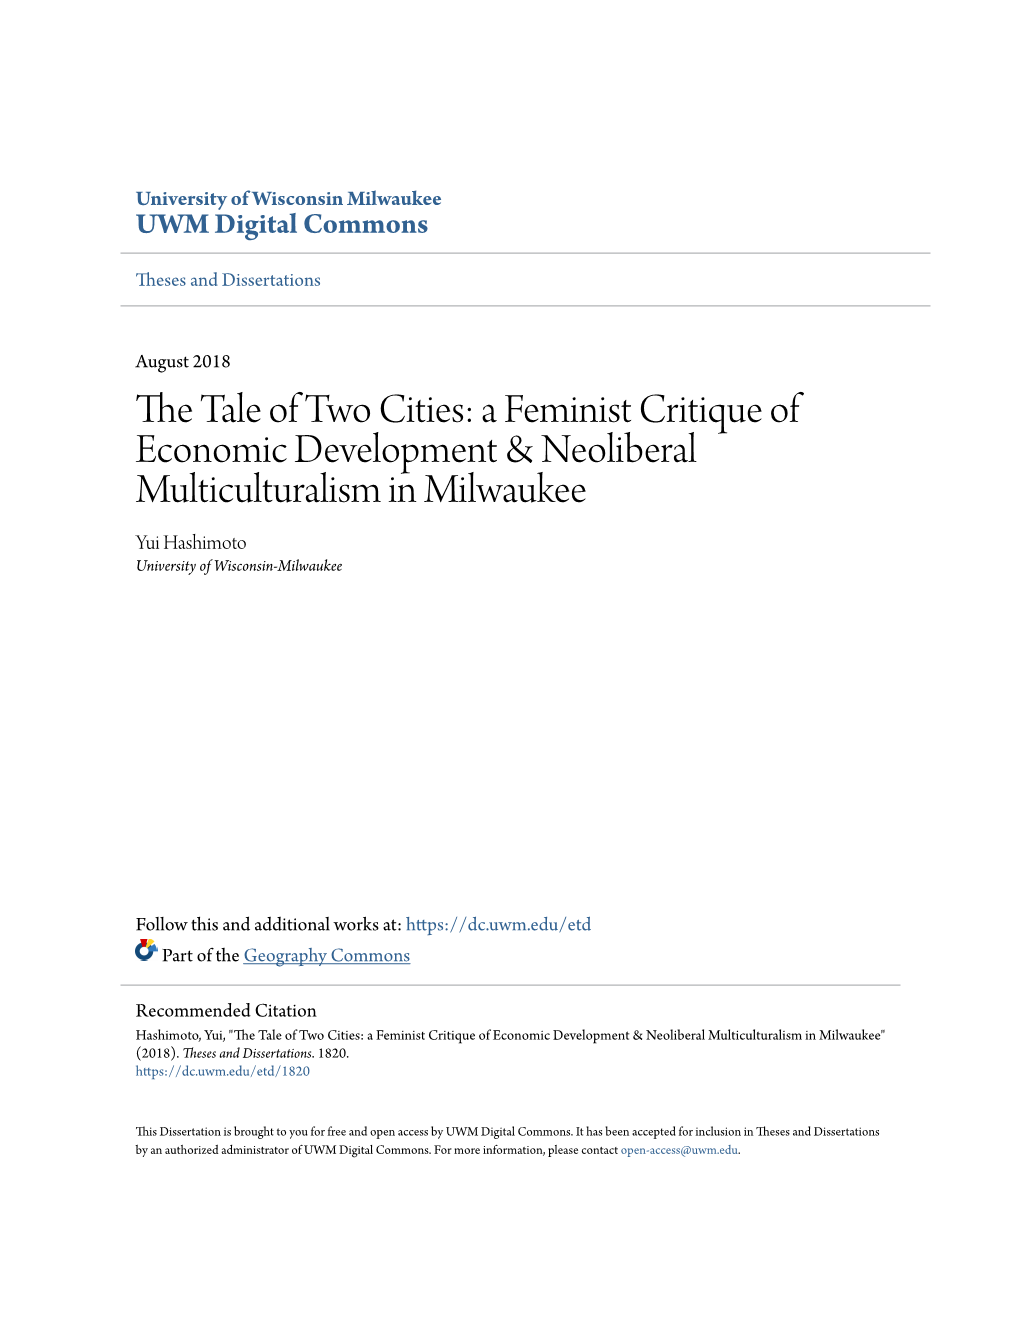 The Tale of Two Cities: a Feminist Critique of Economic Development &